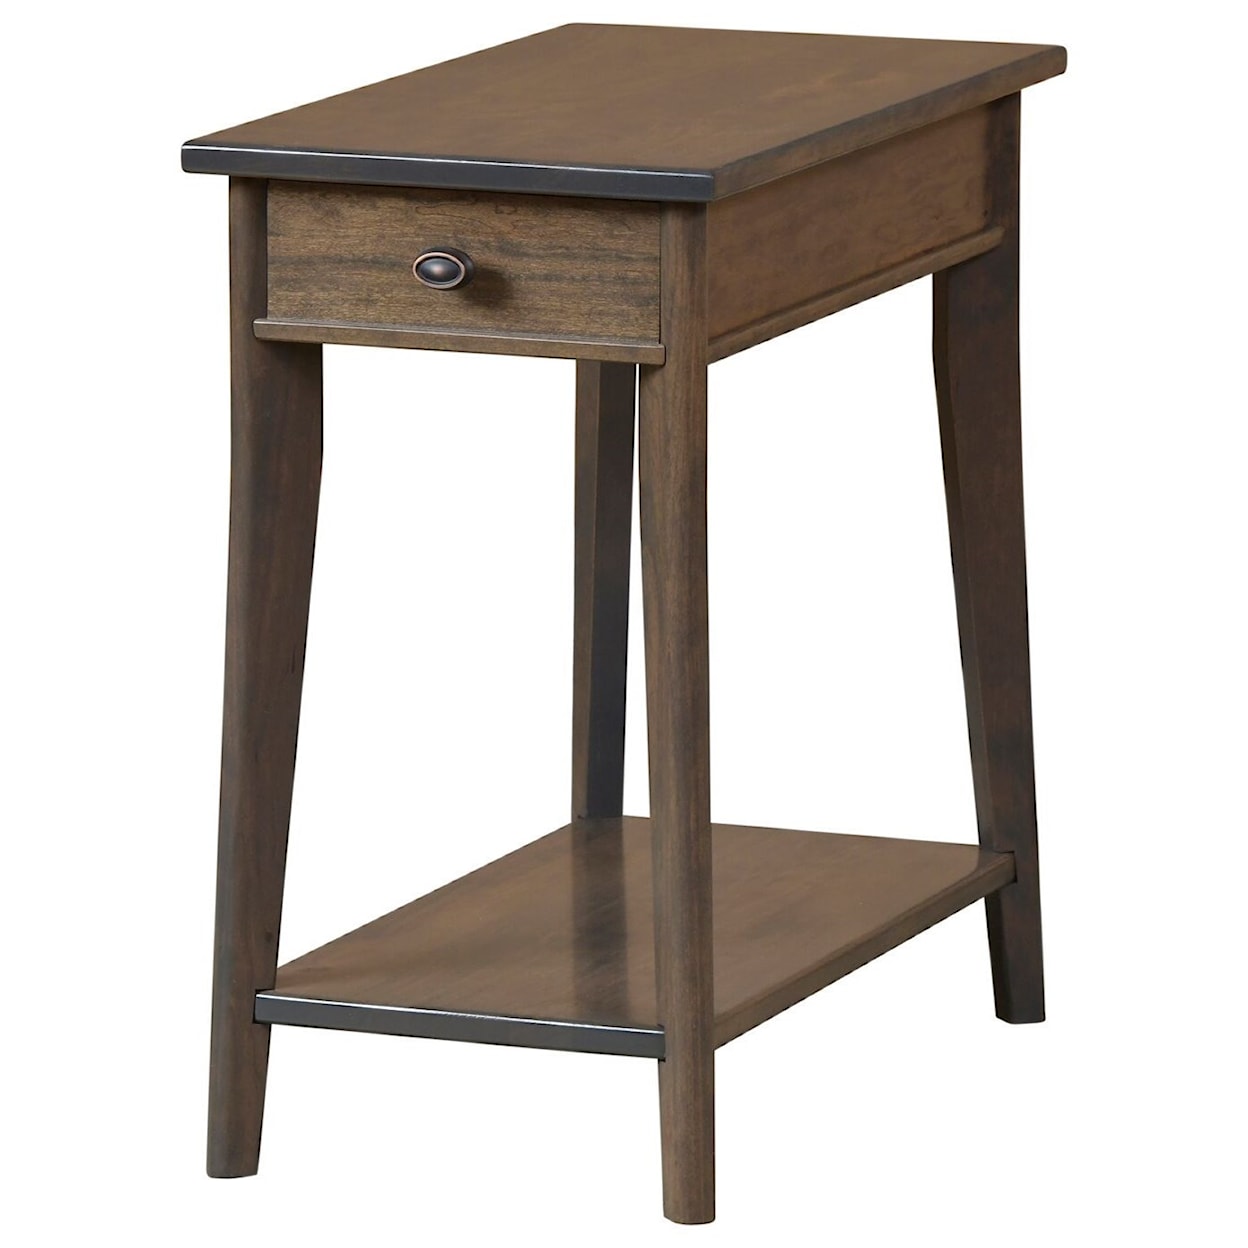 Y & T Woodcraft Austin Chairside Table